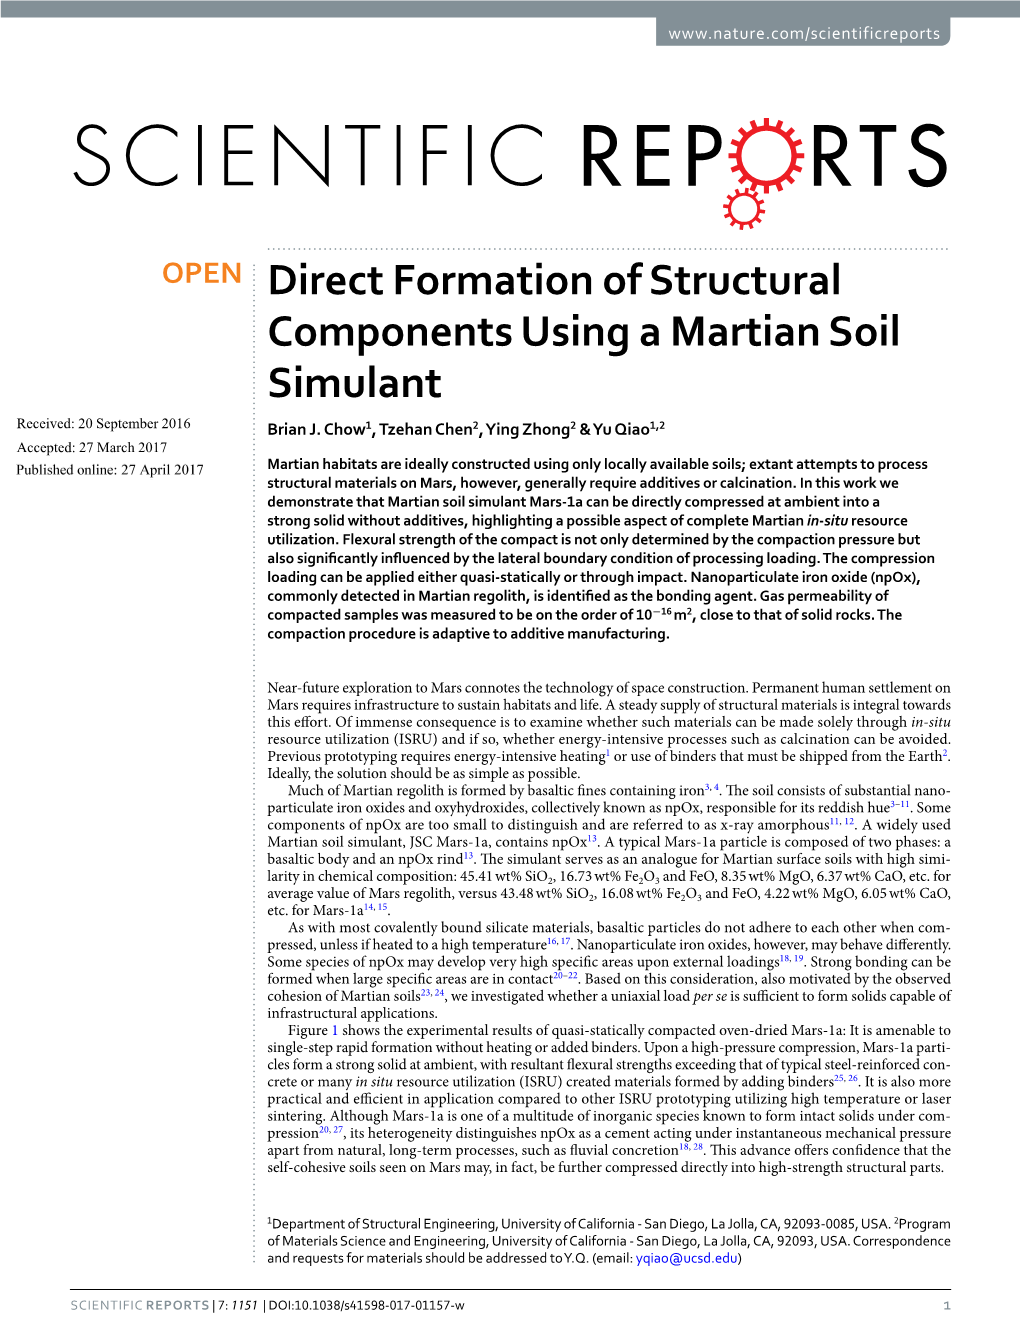 Direct Formation of Structural Components Using a Martian Soil Simulant Received: 20 September 2016 Brian J